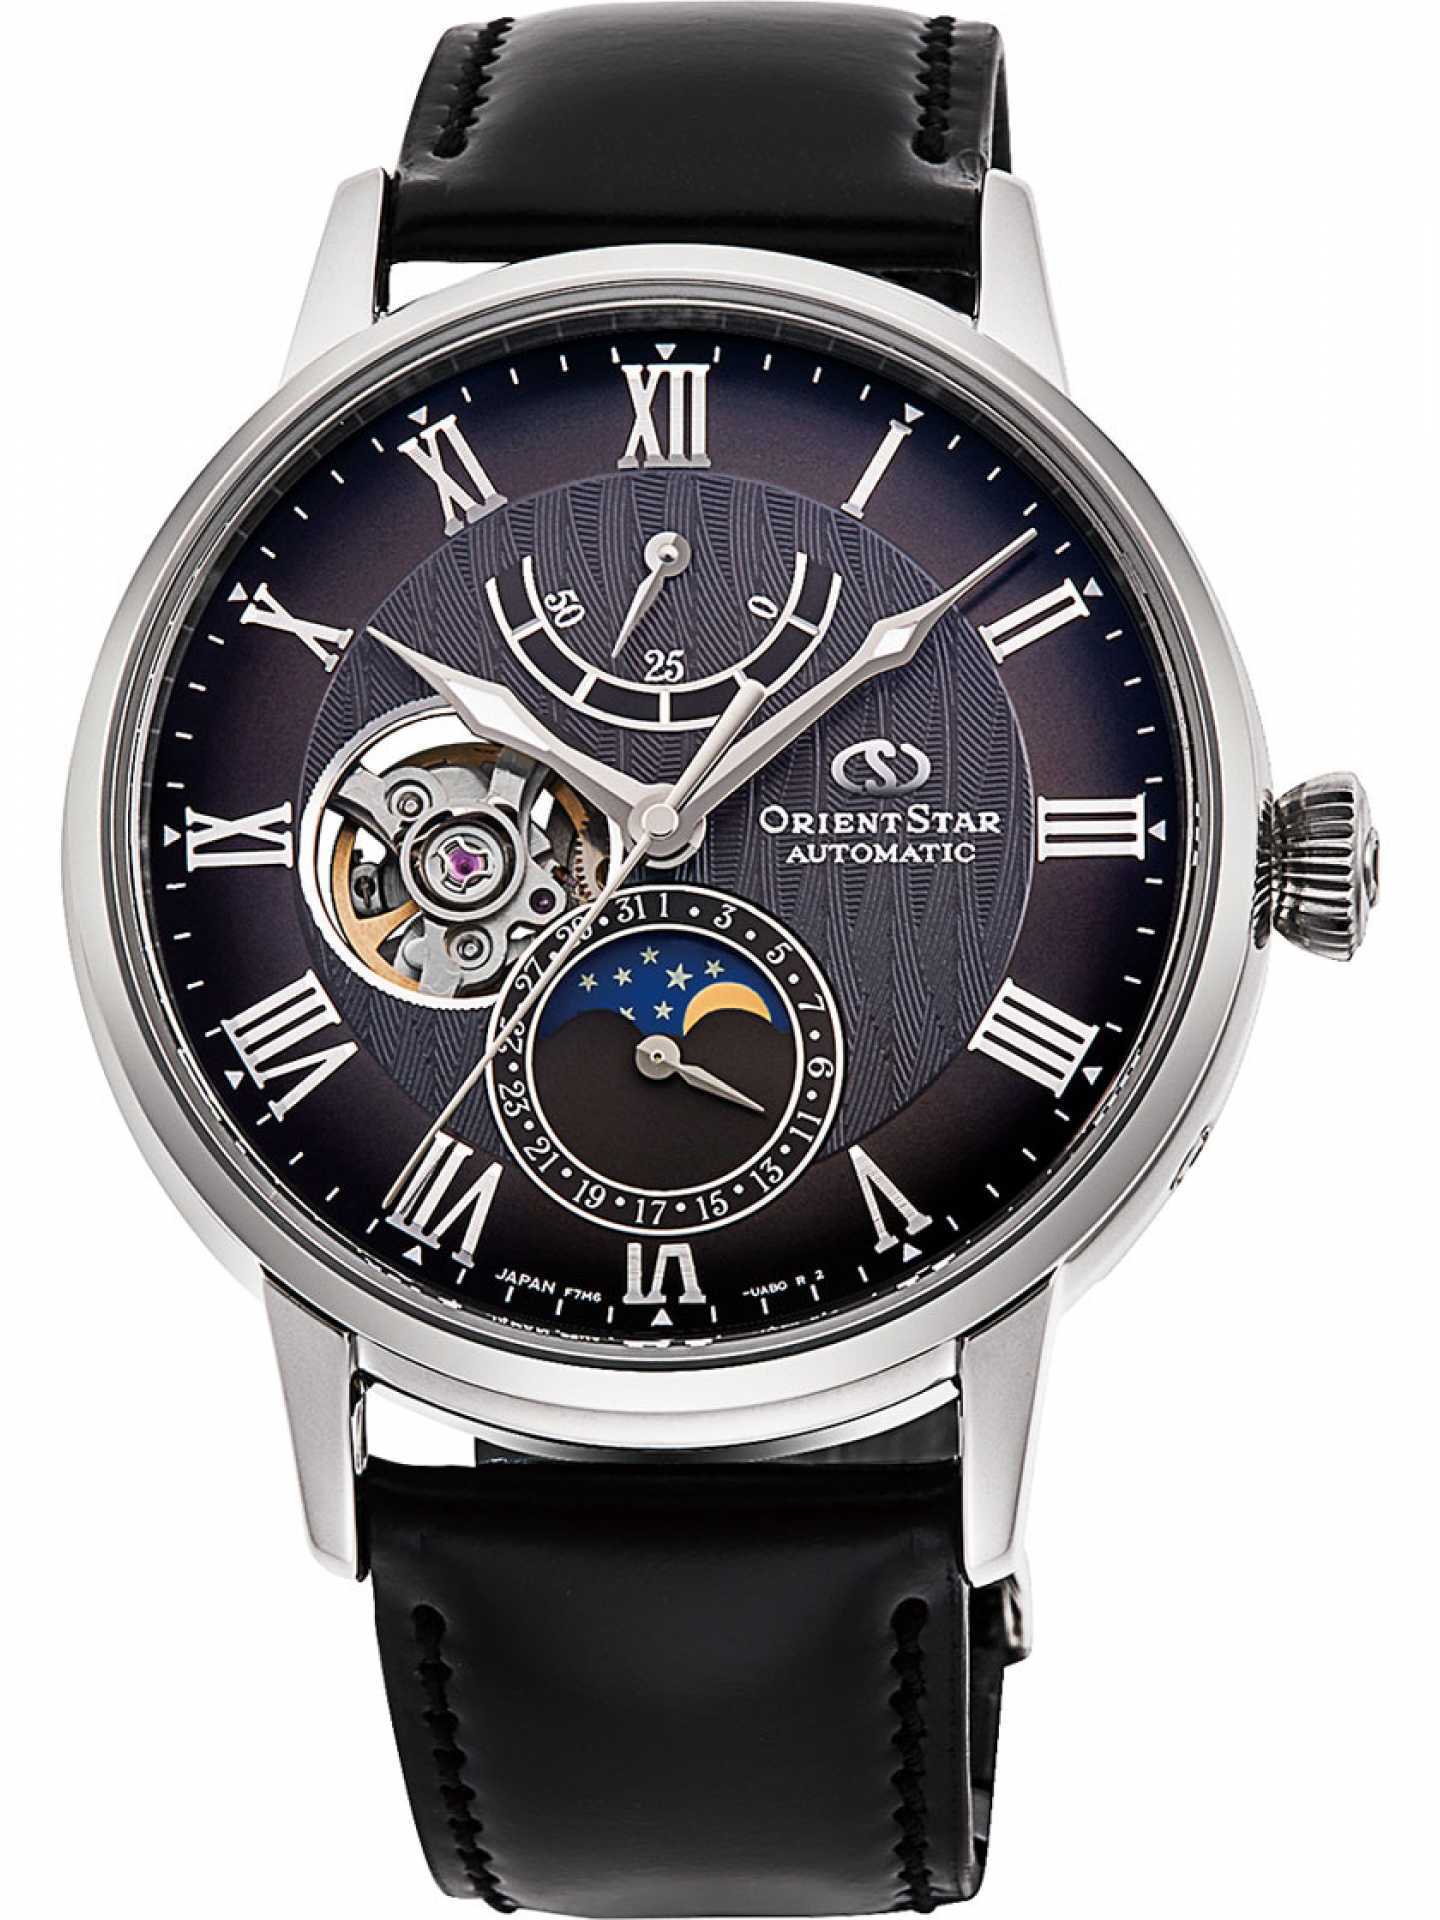 Orient Star Mechanical Moon Phase